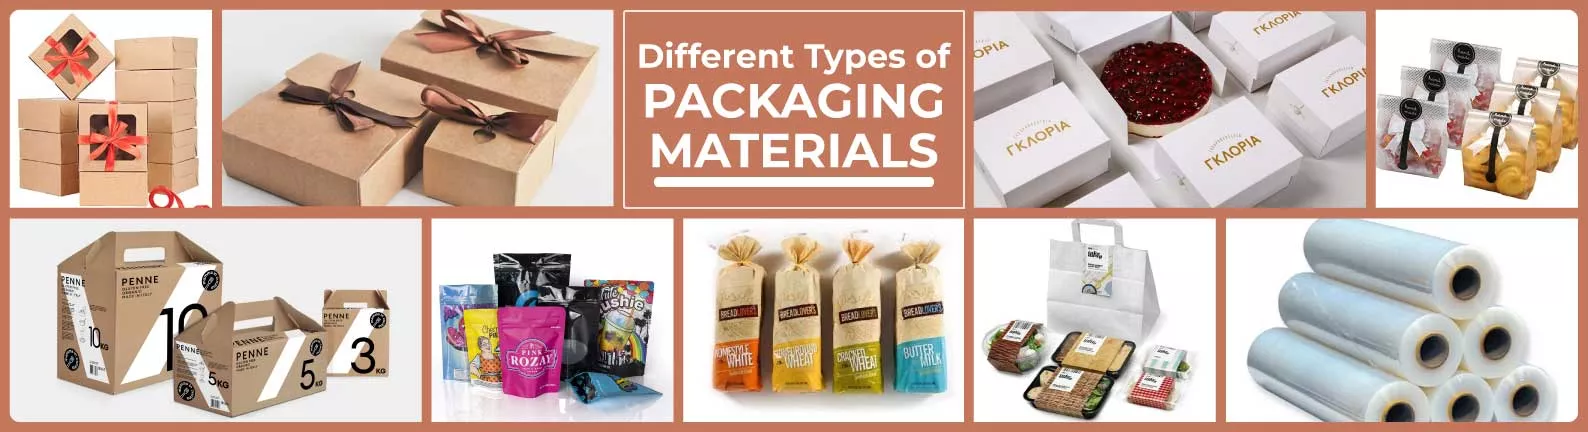 34 Major Types of Packaging Materials to Consider